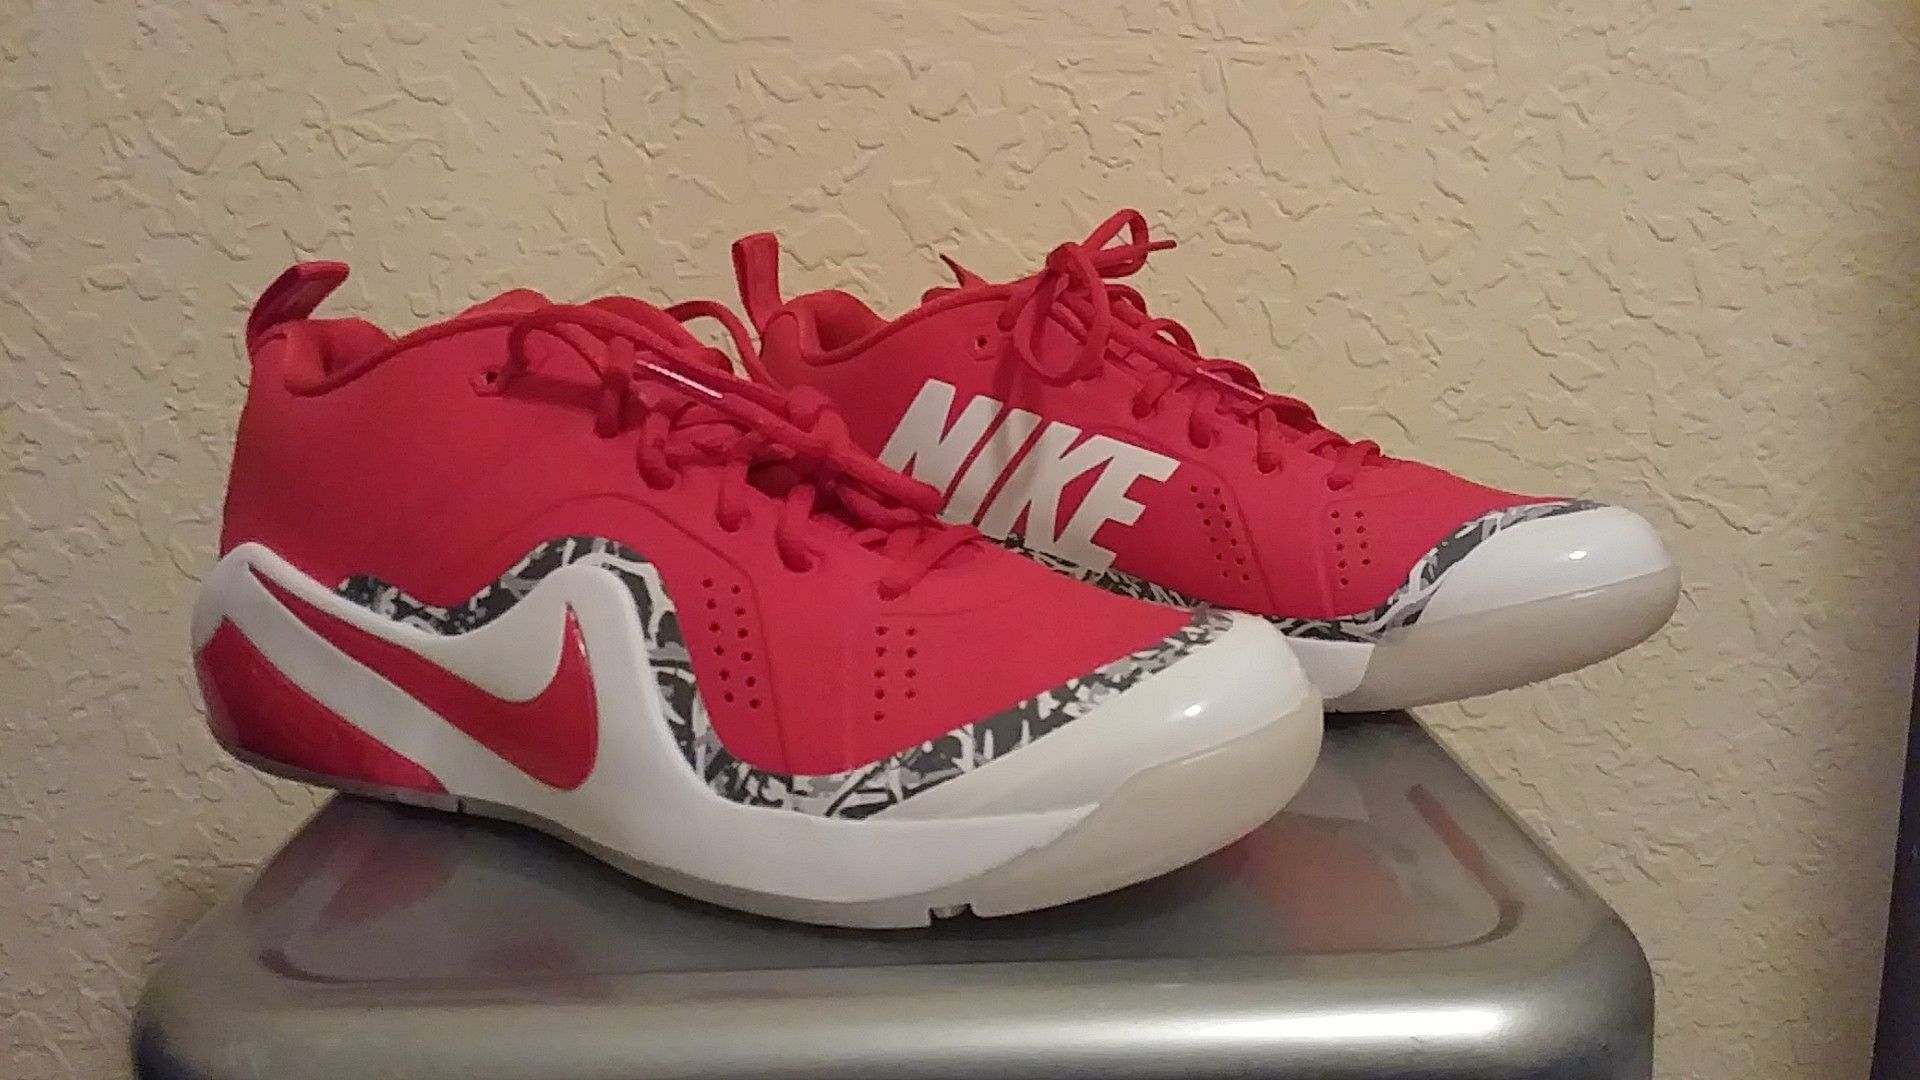 Mike trout shoes by Nike size 10.5